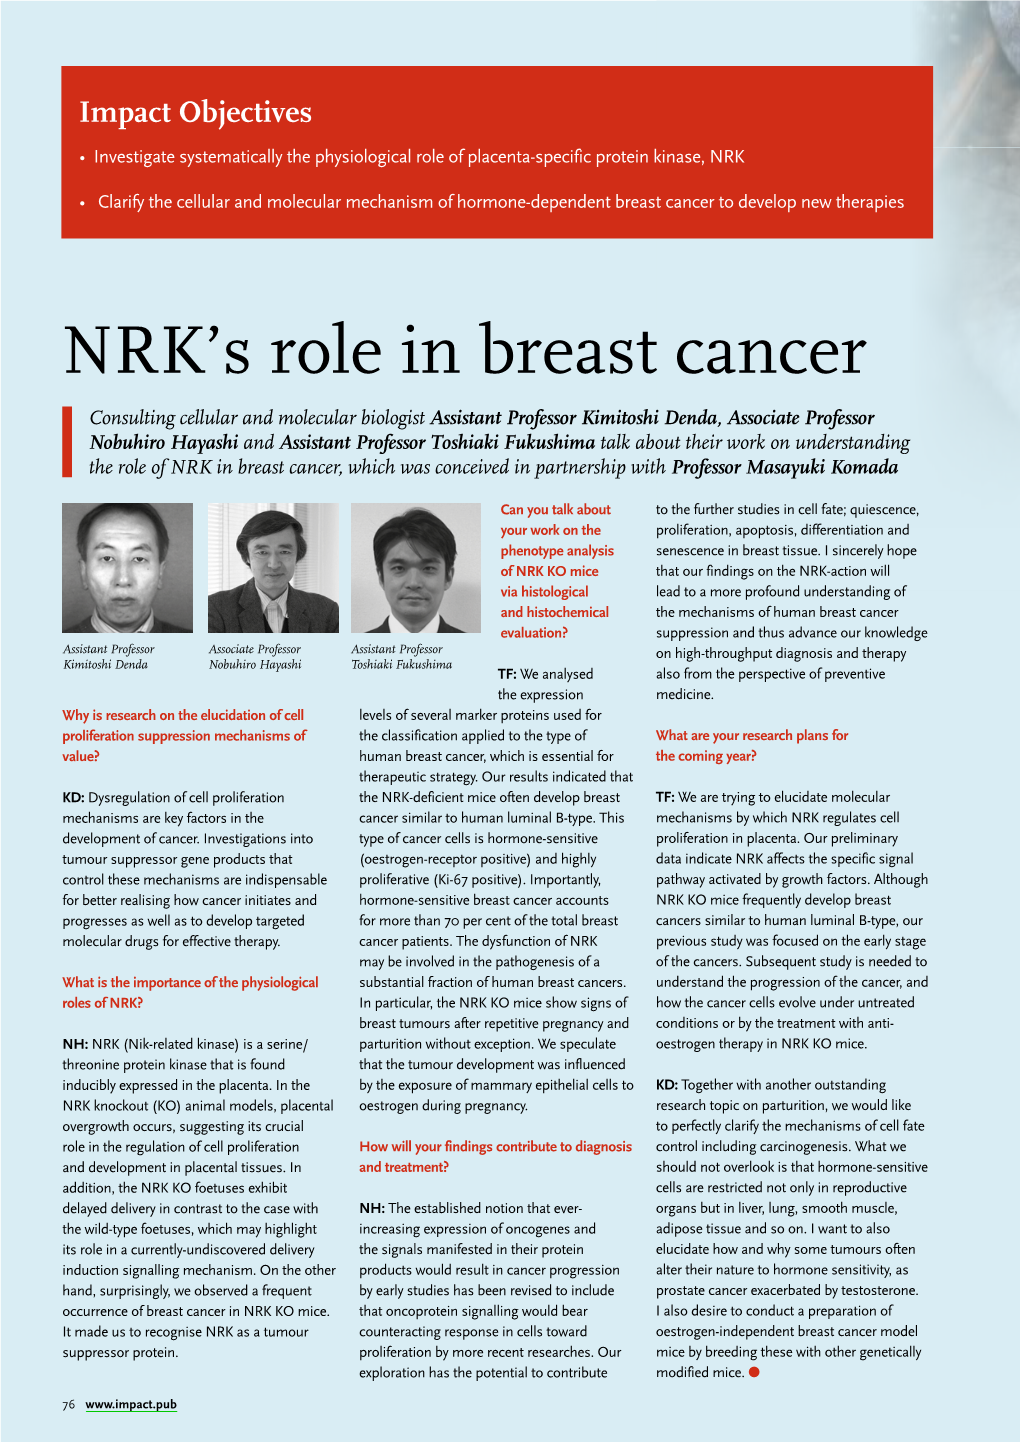 Understanding the Role of NRK in Breast Cancer, Which Was Conceived in Partnership with Professor Masayuki Komada